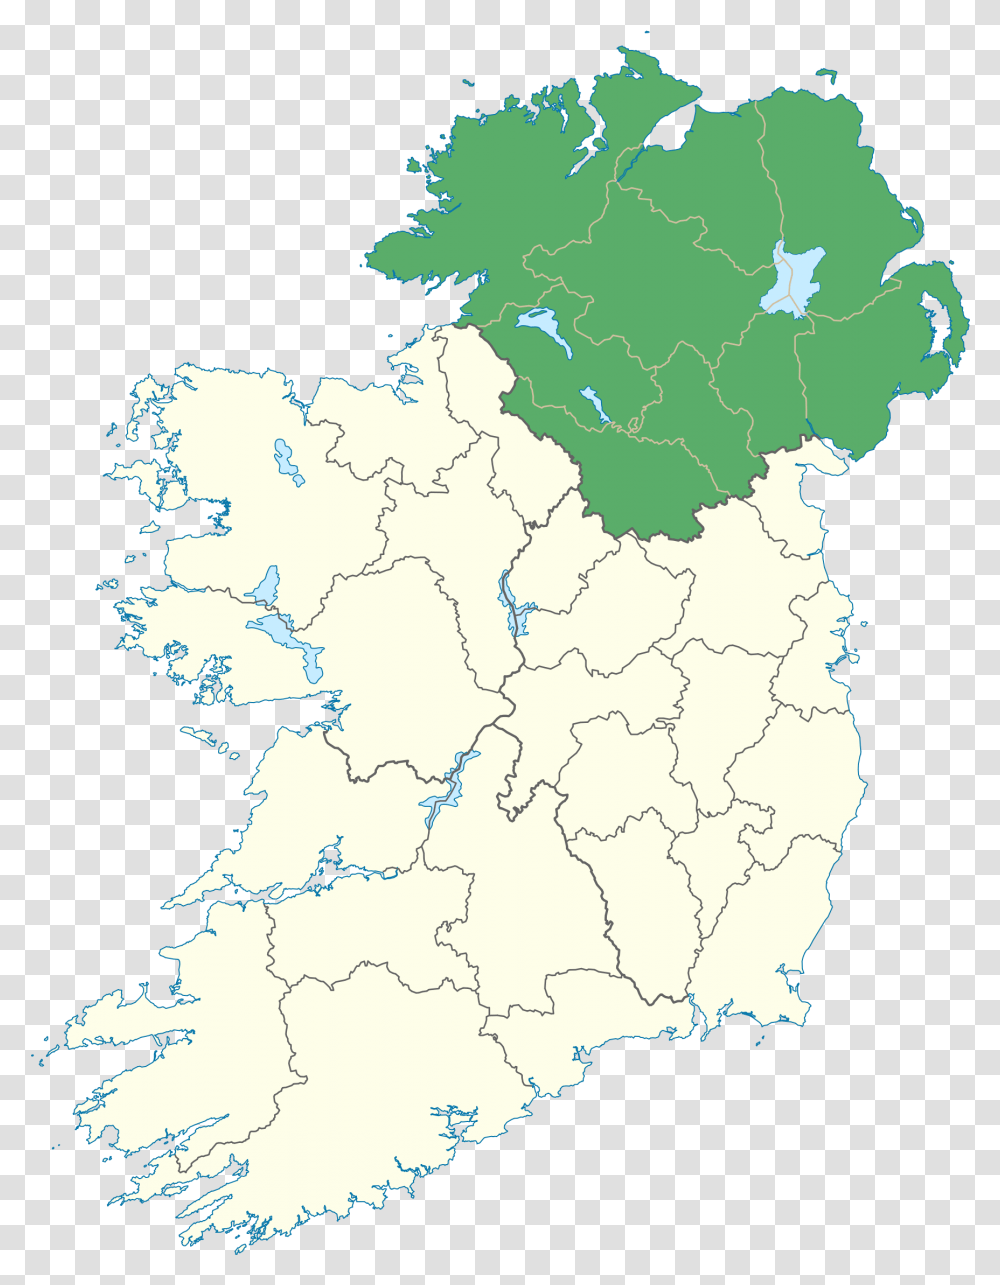 Map Of New Ireland Province Cork On A Map, Diagram, Plot, Atlas Transparent Png